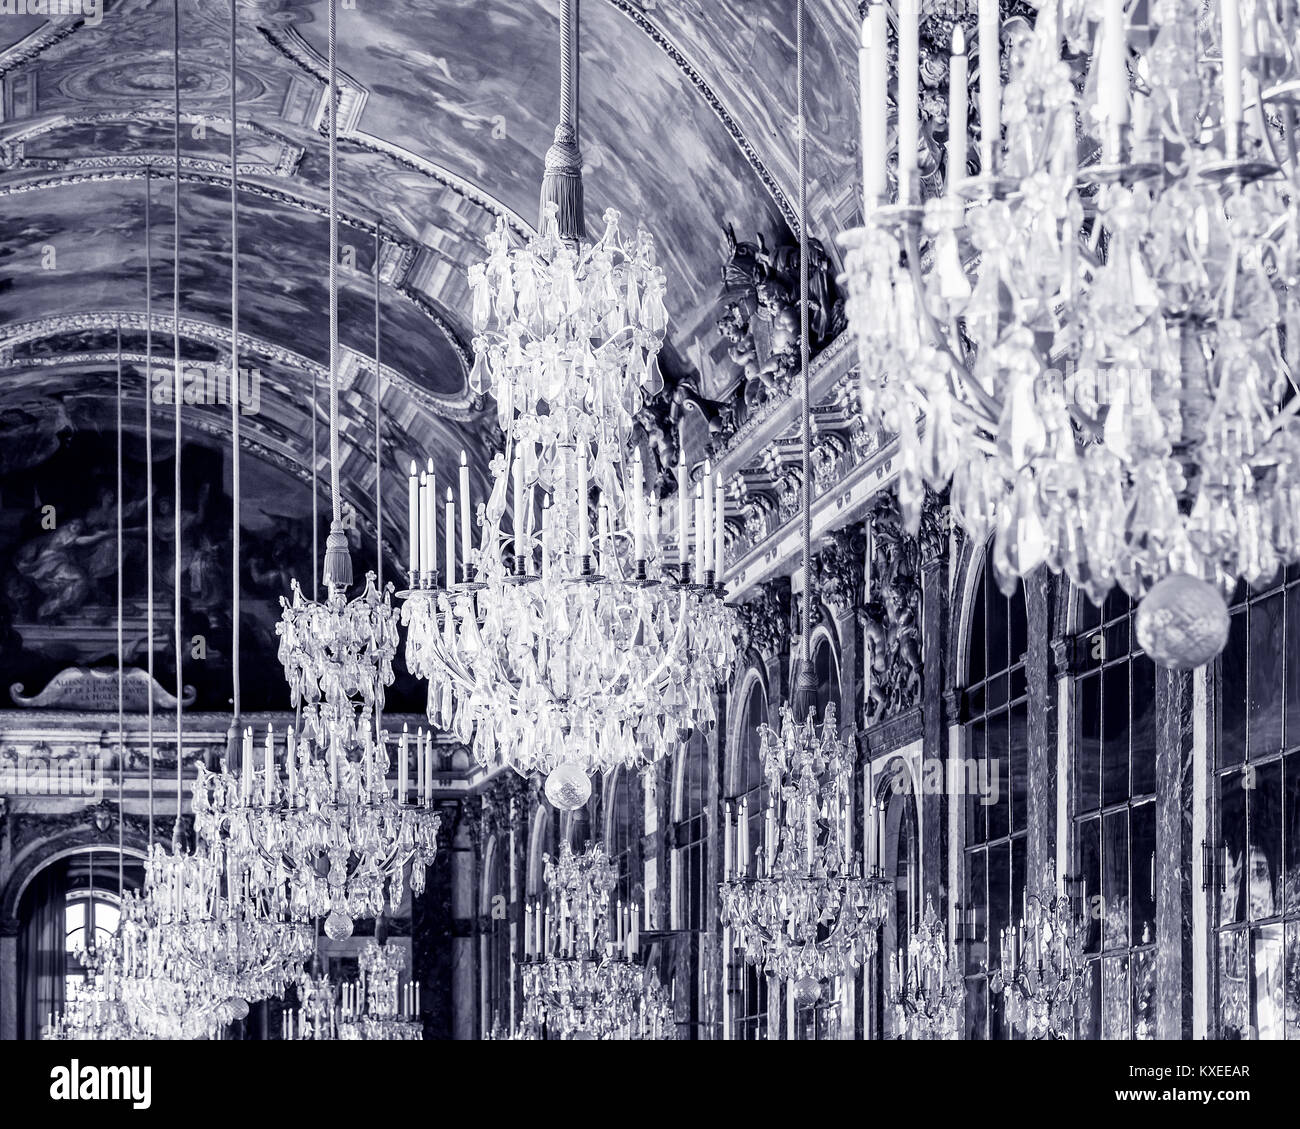 Ceiling and chandeliers (Lustre) in the Hall of Mirrors, Chateau de Versailles, France Stock Photo